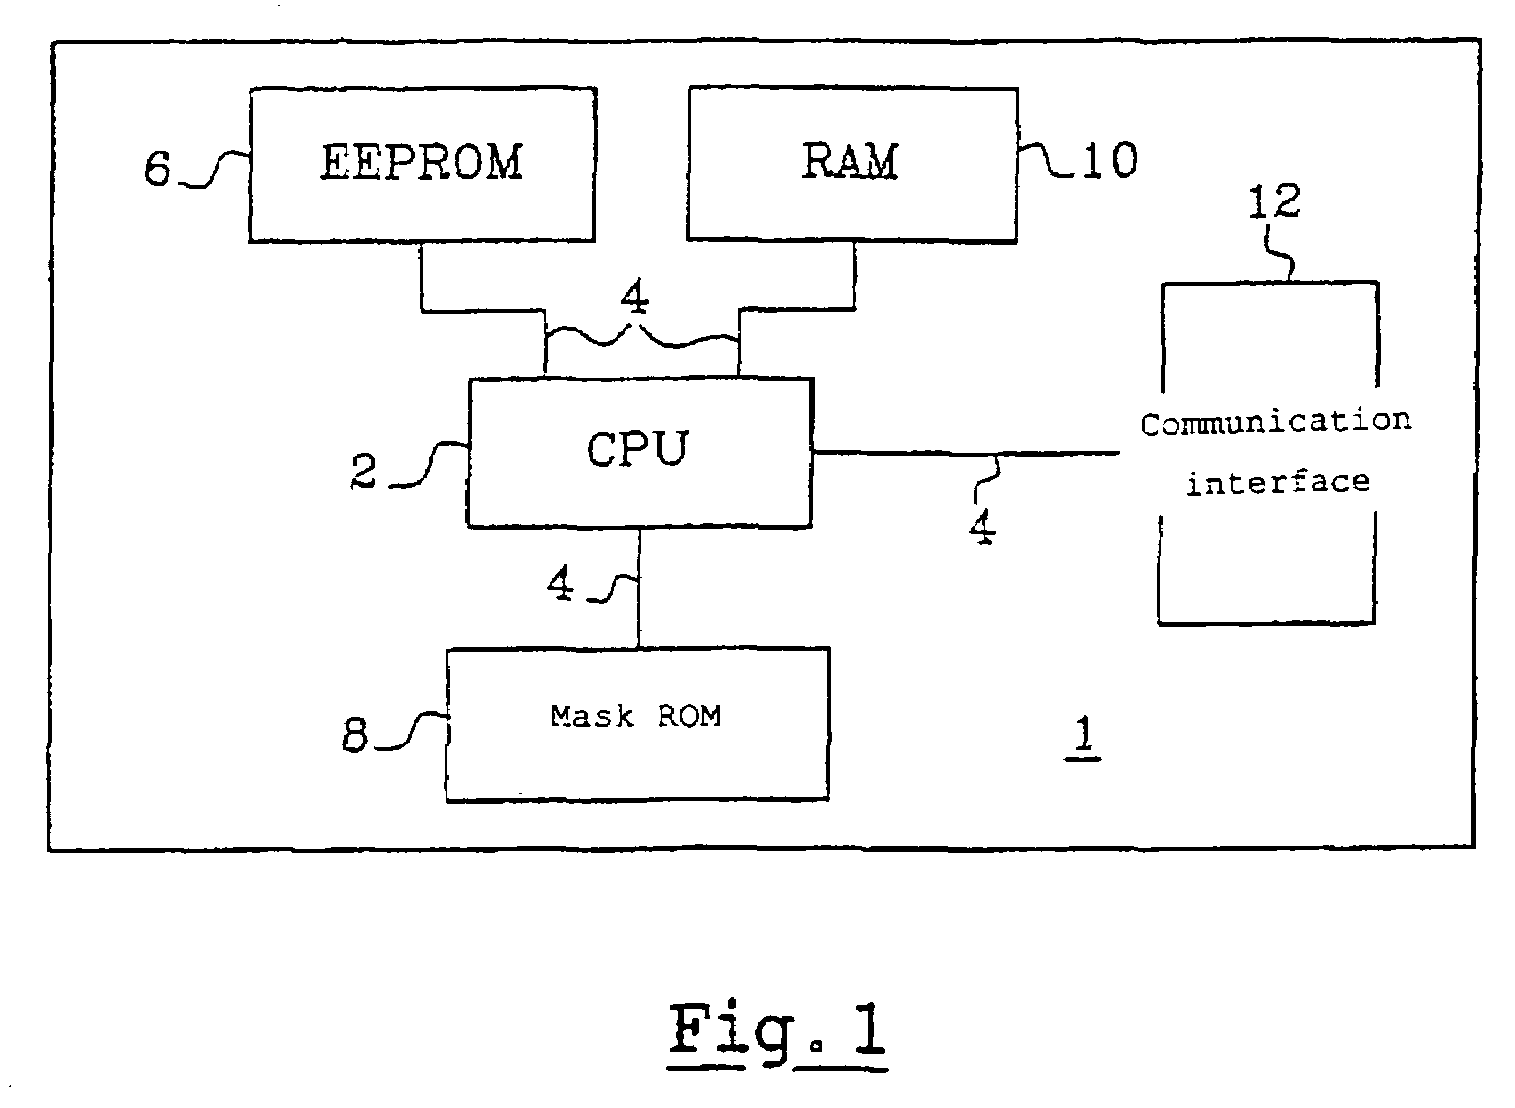 Method and system for managing data designed to be stored in a programmable smart card